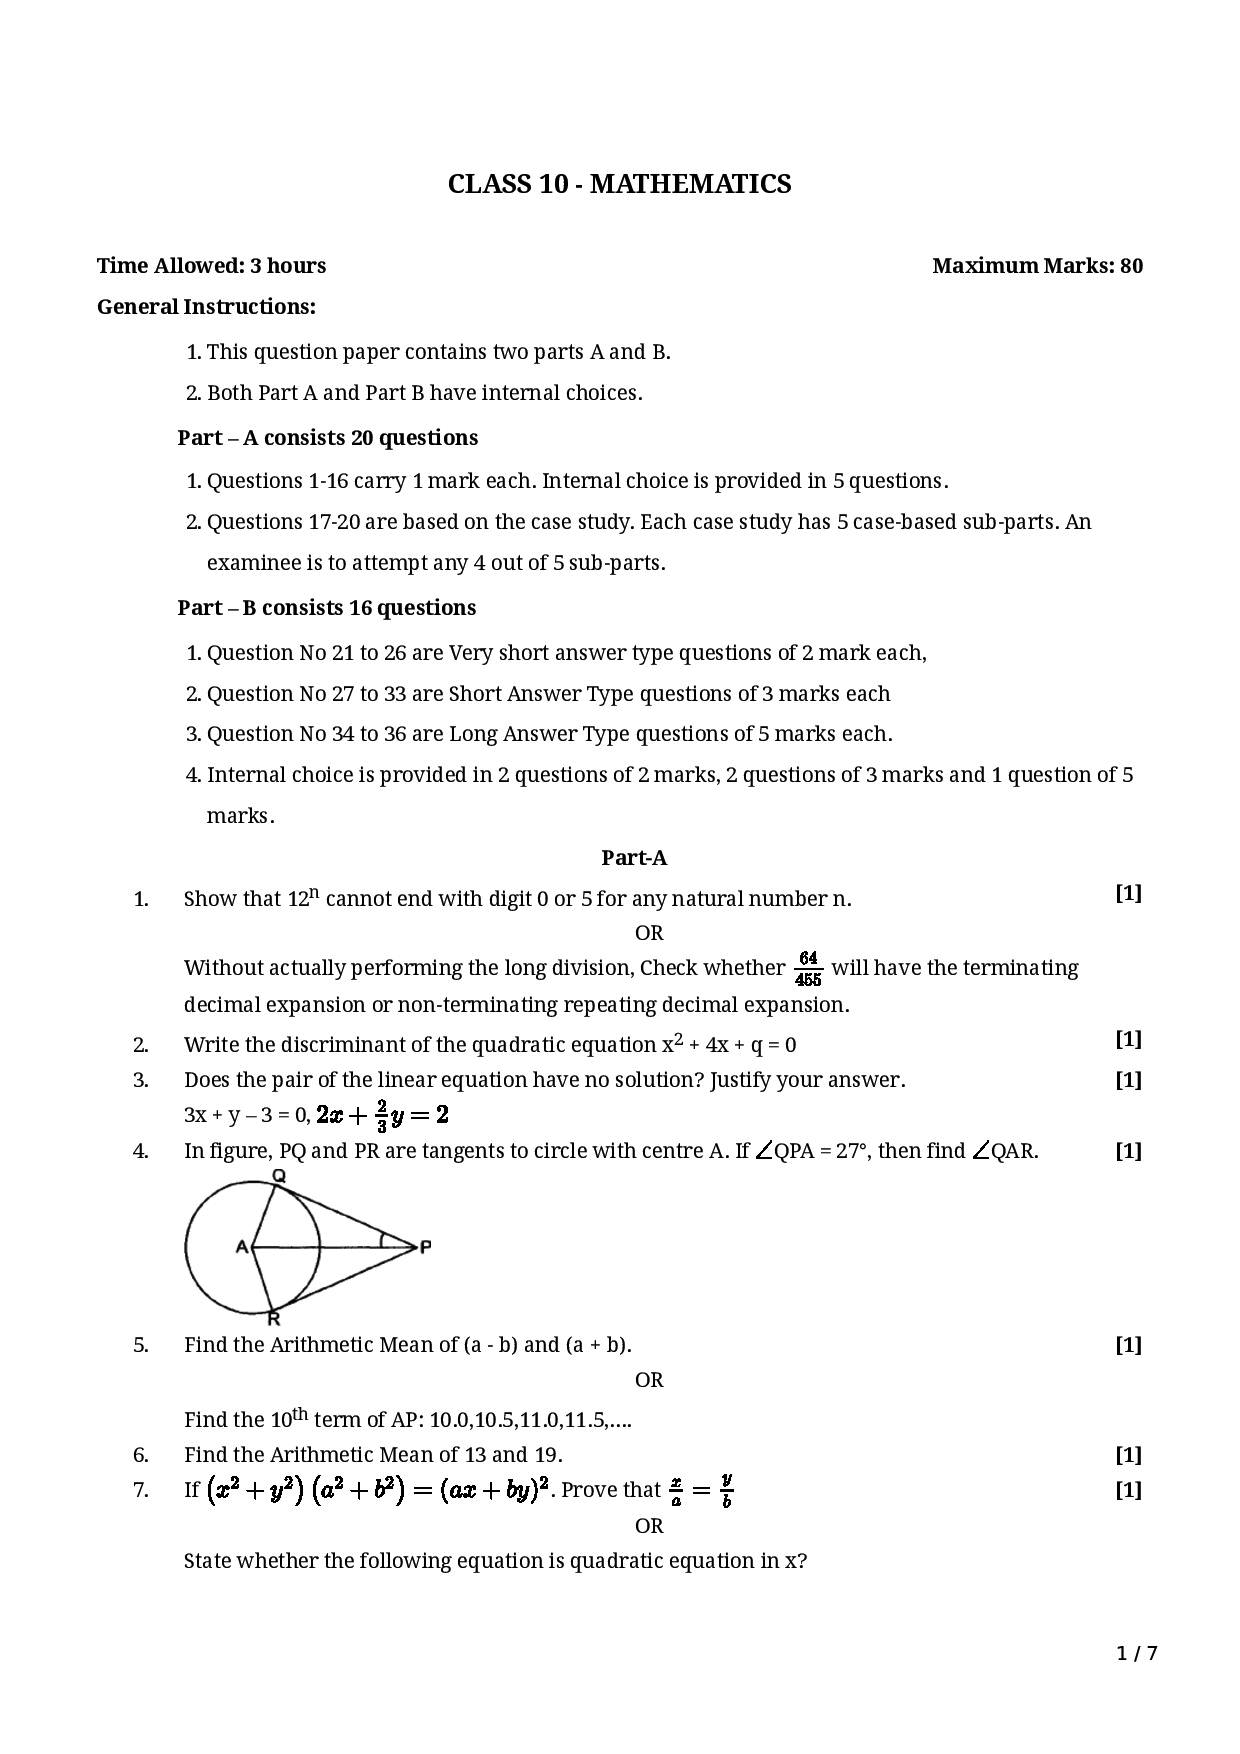 essay on maths for class 10